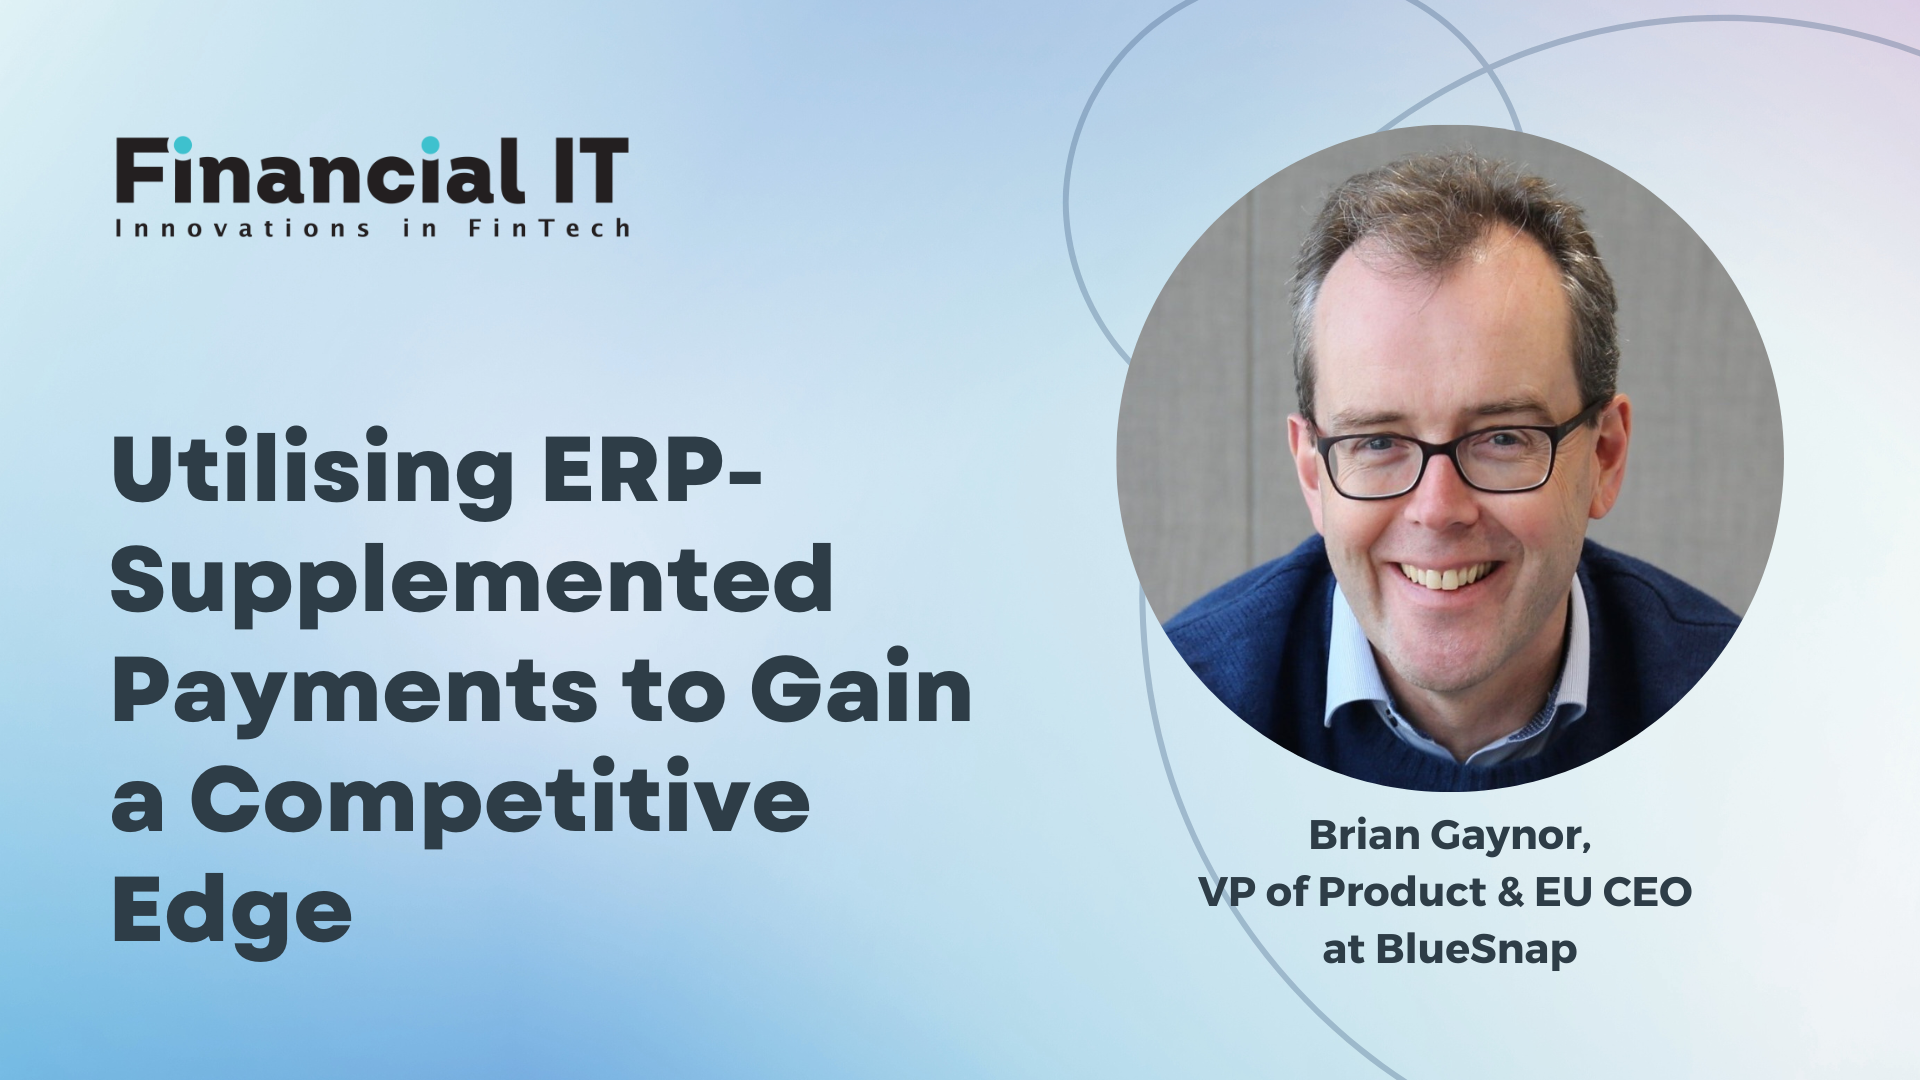 Utilising ERP-Supplemented Payments to Gain a Competitive Edge